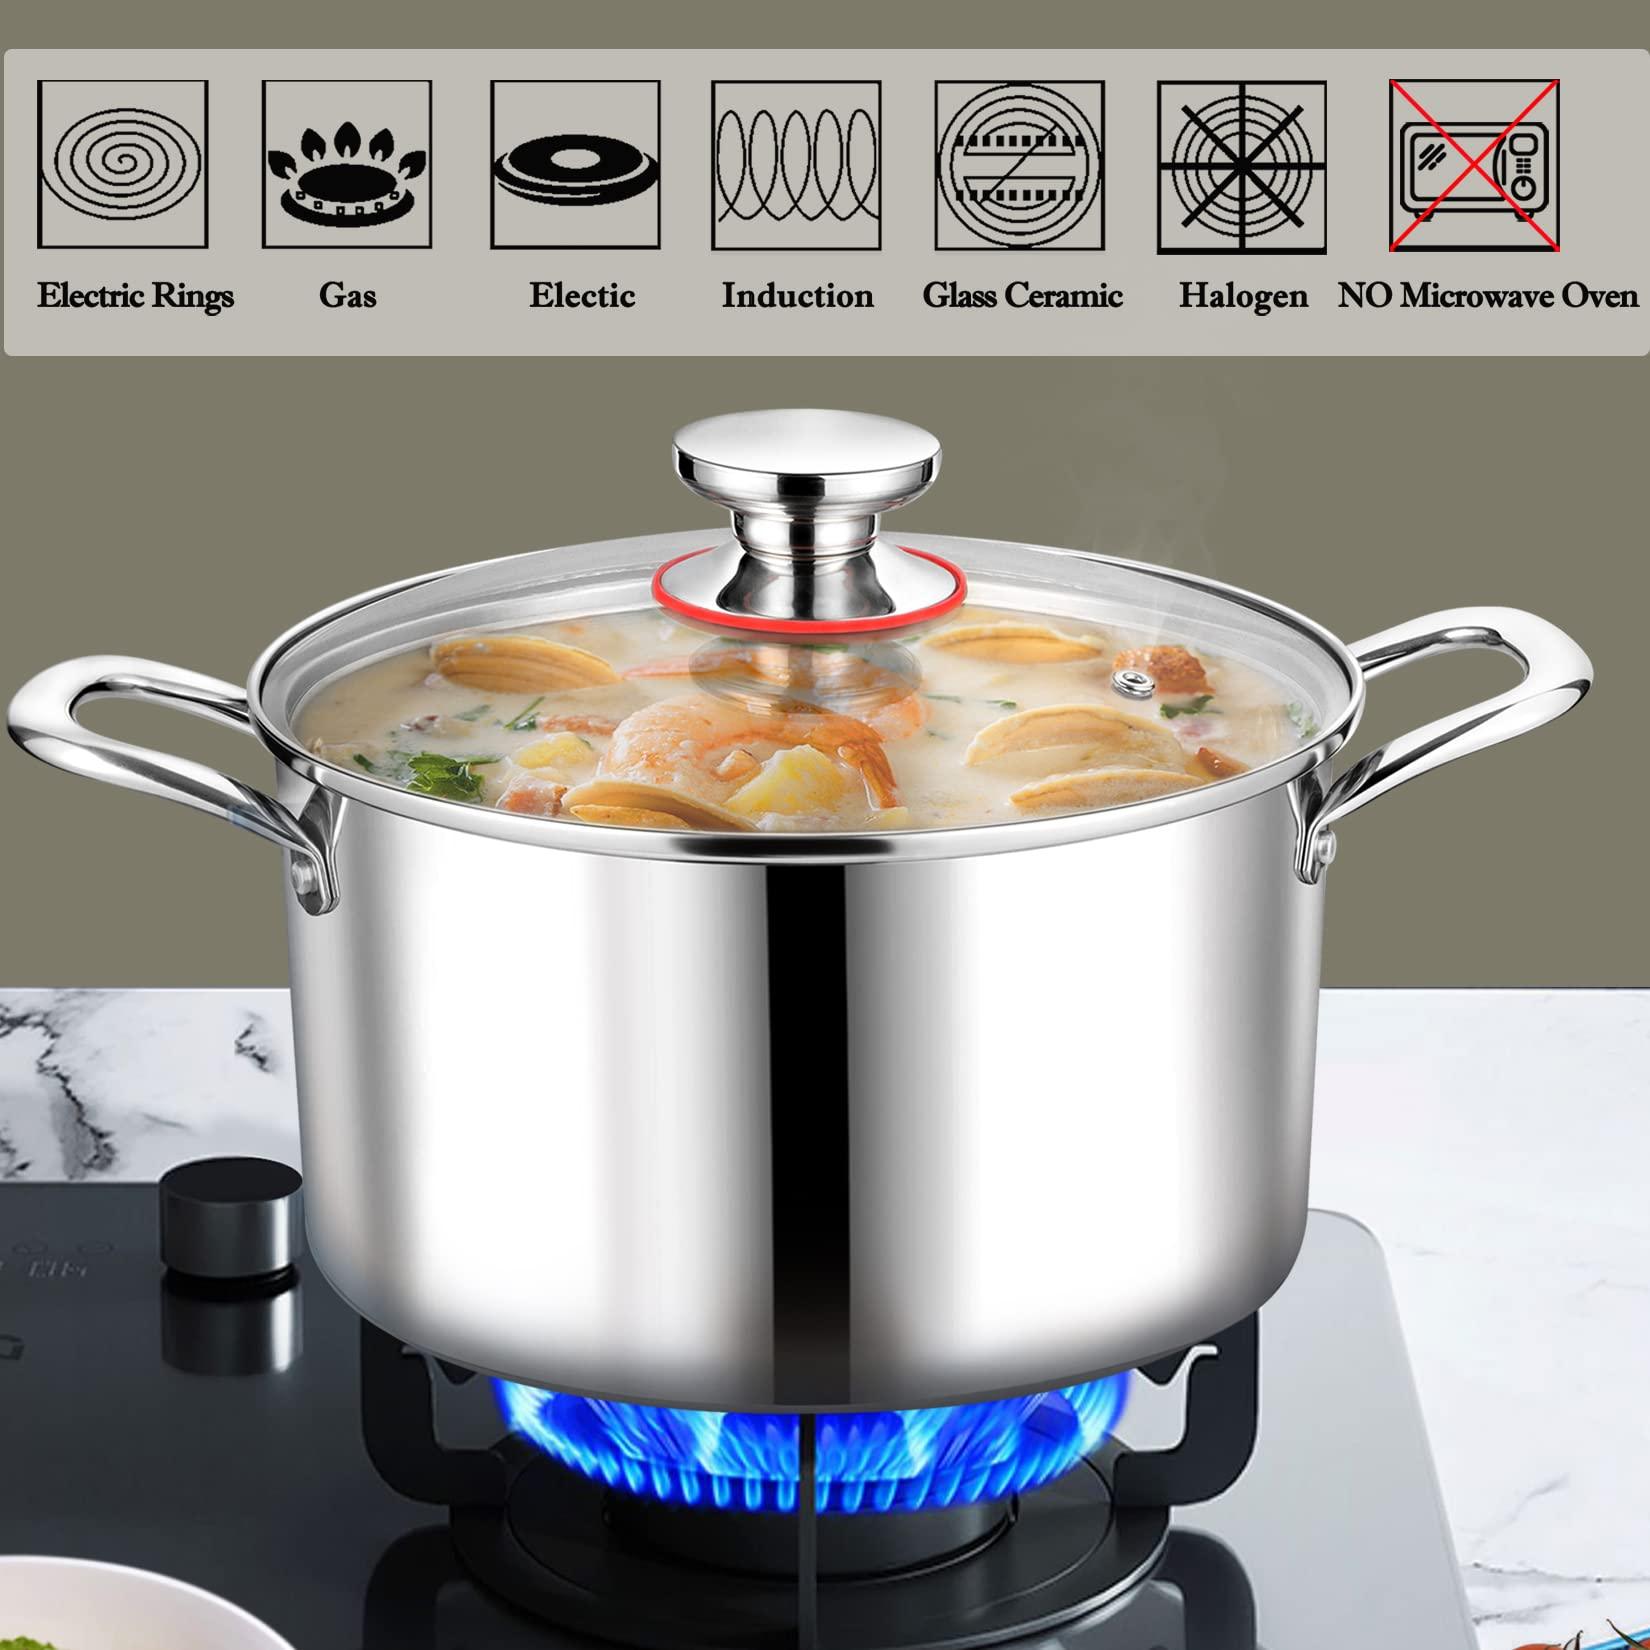 P&P CHEF 6 Quart Stock Cooking Pot, Tri-Ply Stainless Steel Stockpot with Lid for Induction Gas Electric Stoves, Transparent Cover & Double Riveted Handles, Heavy Duty & Dishwasher Safe - CookCave